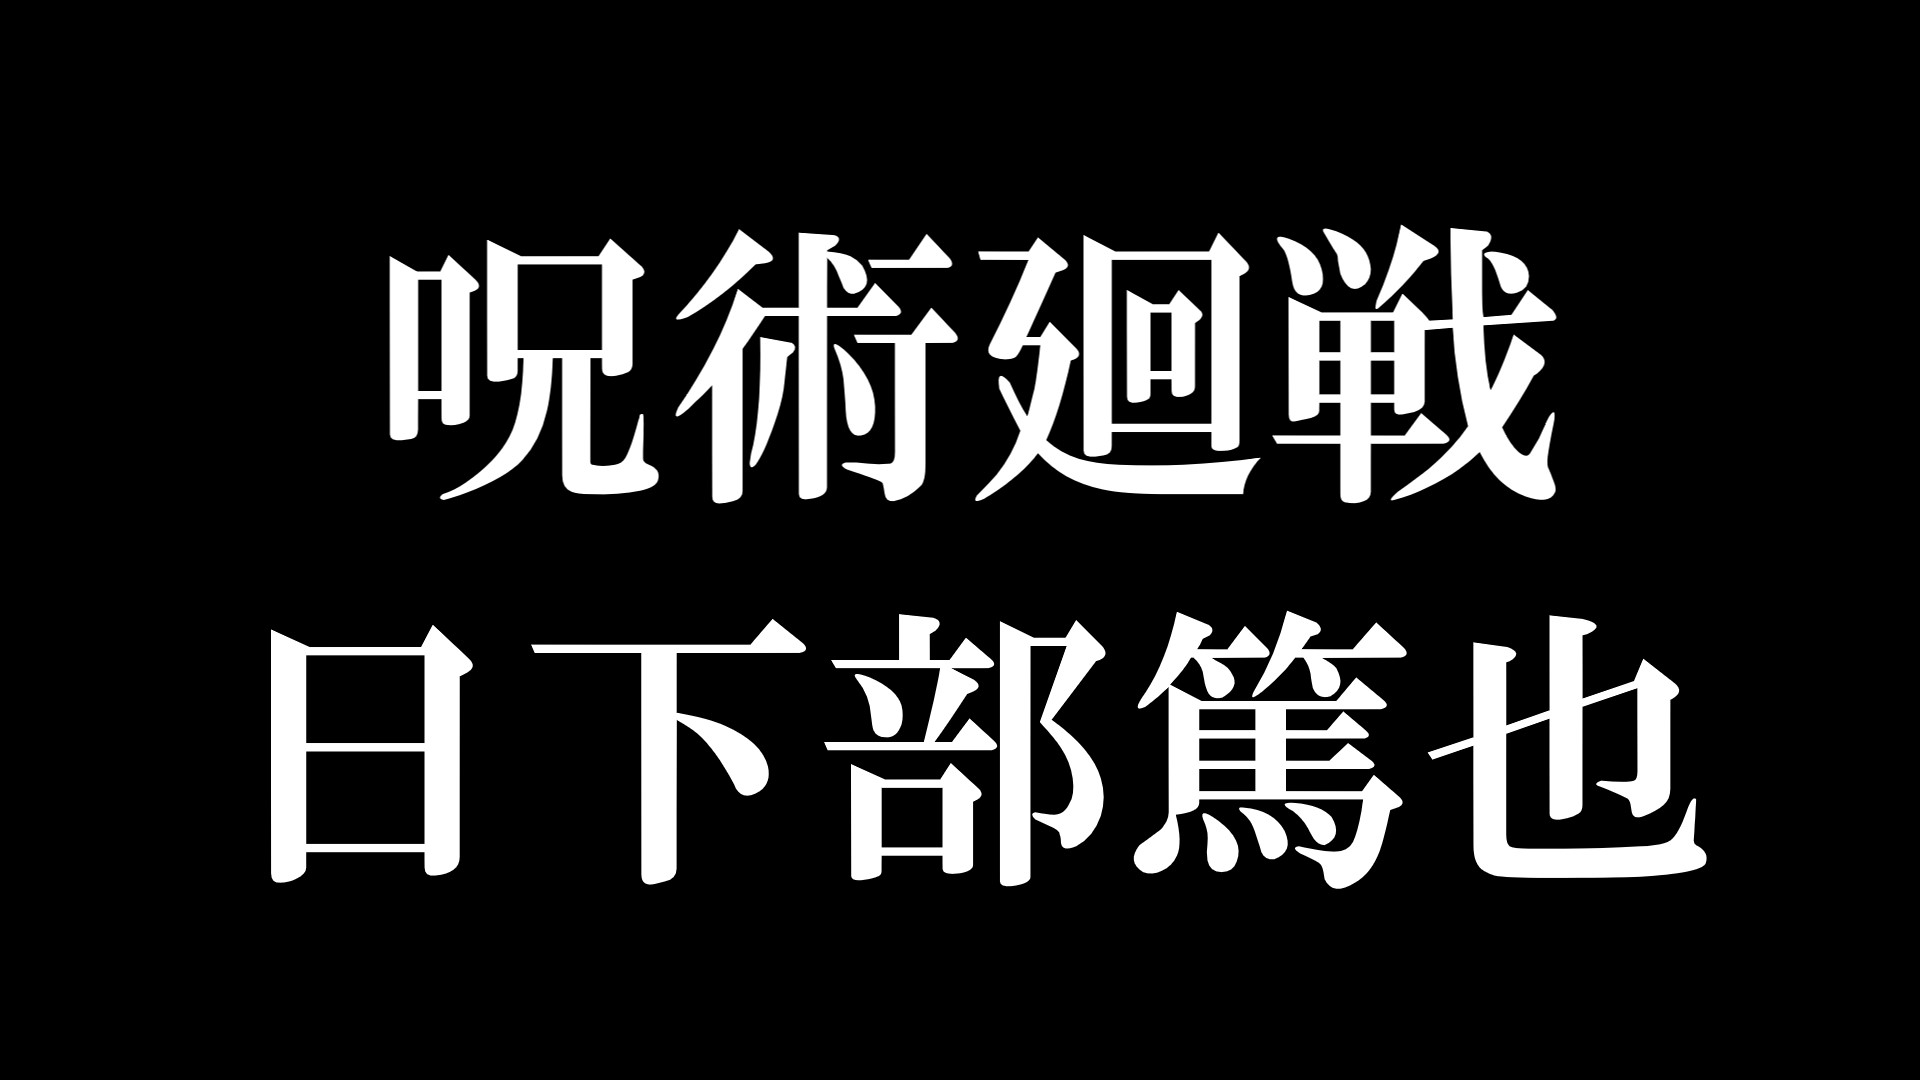 This kanji 呪 means curse